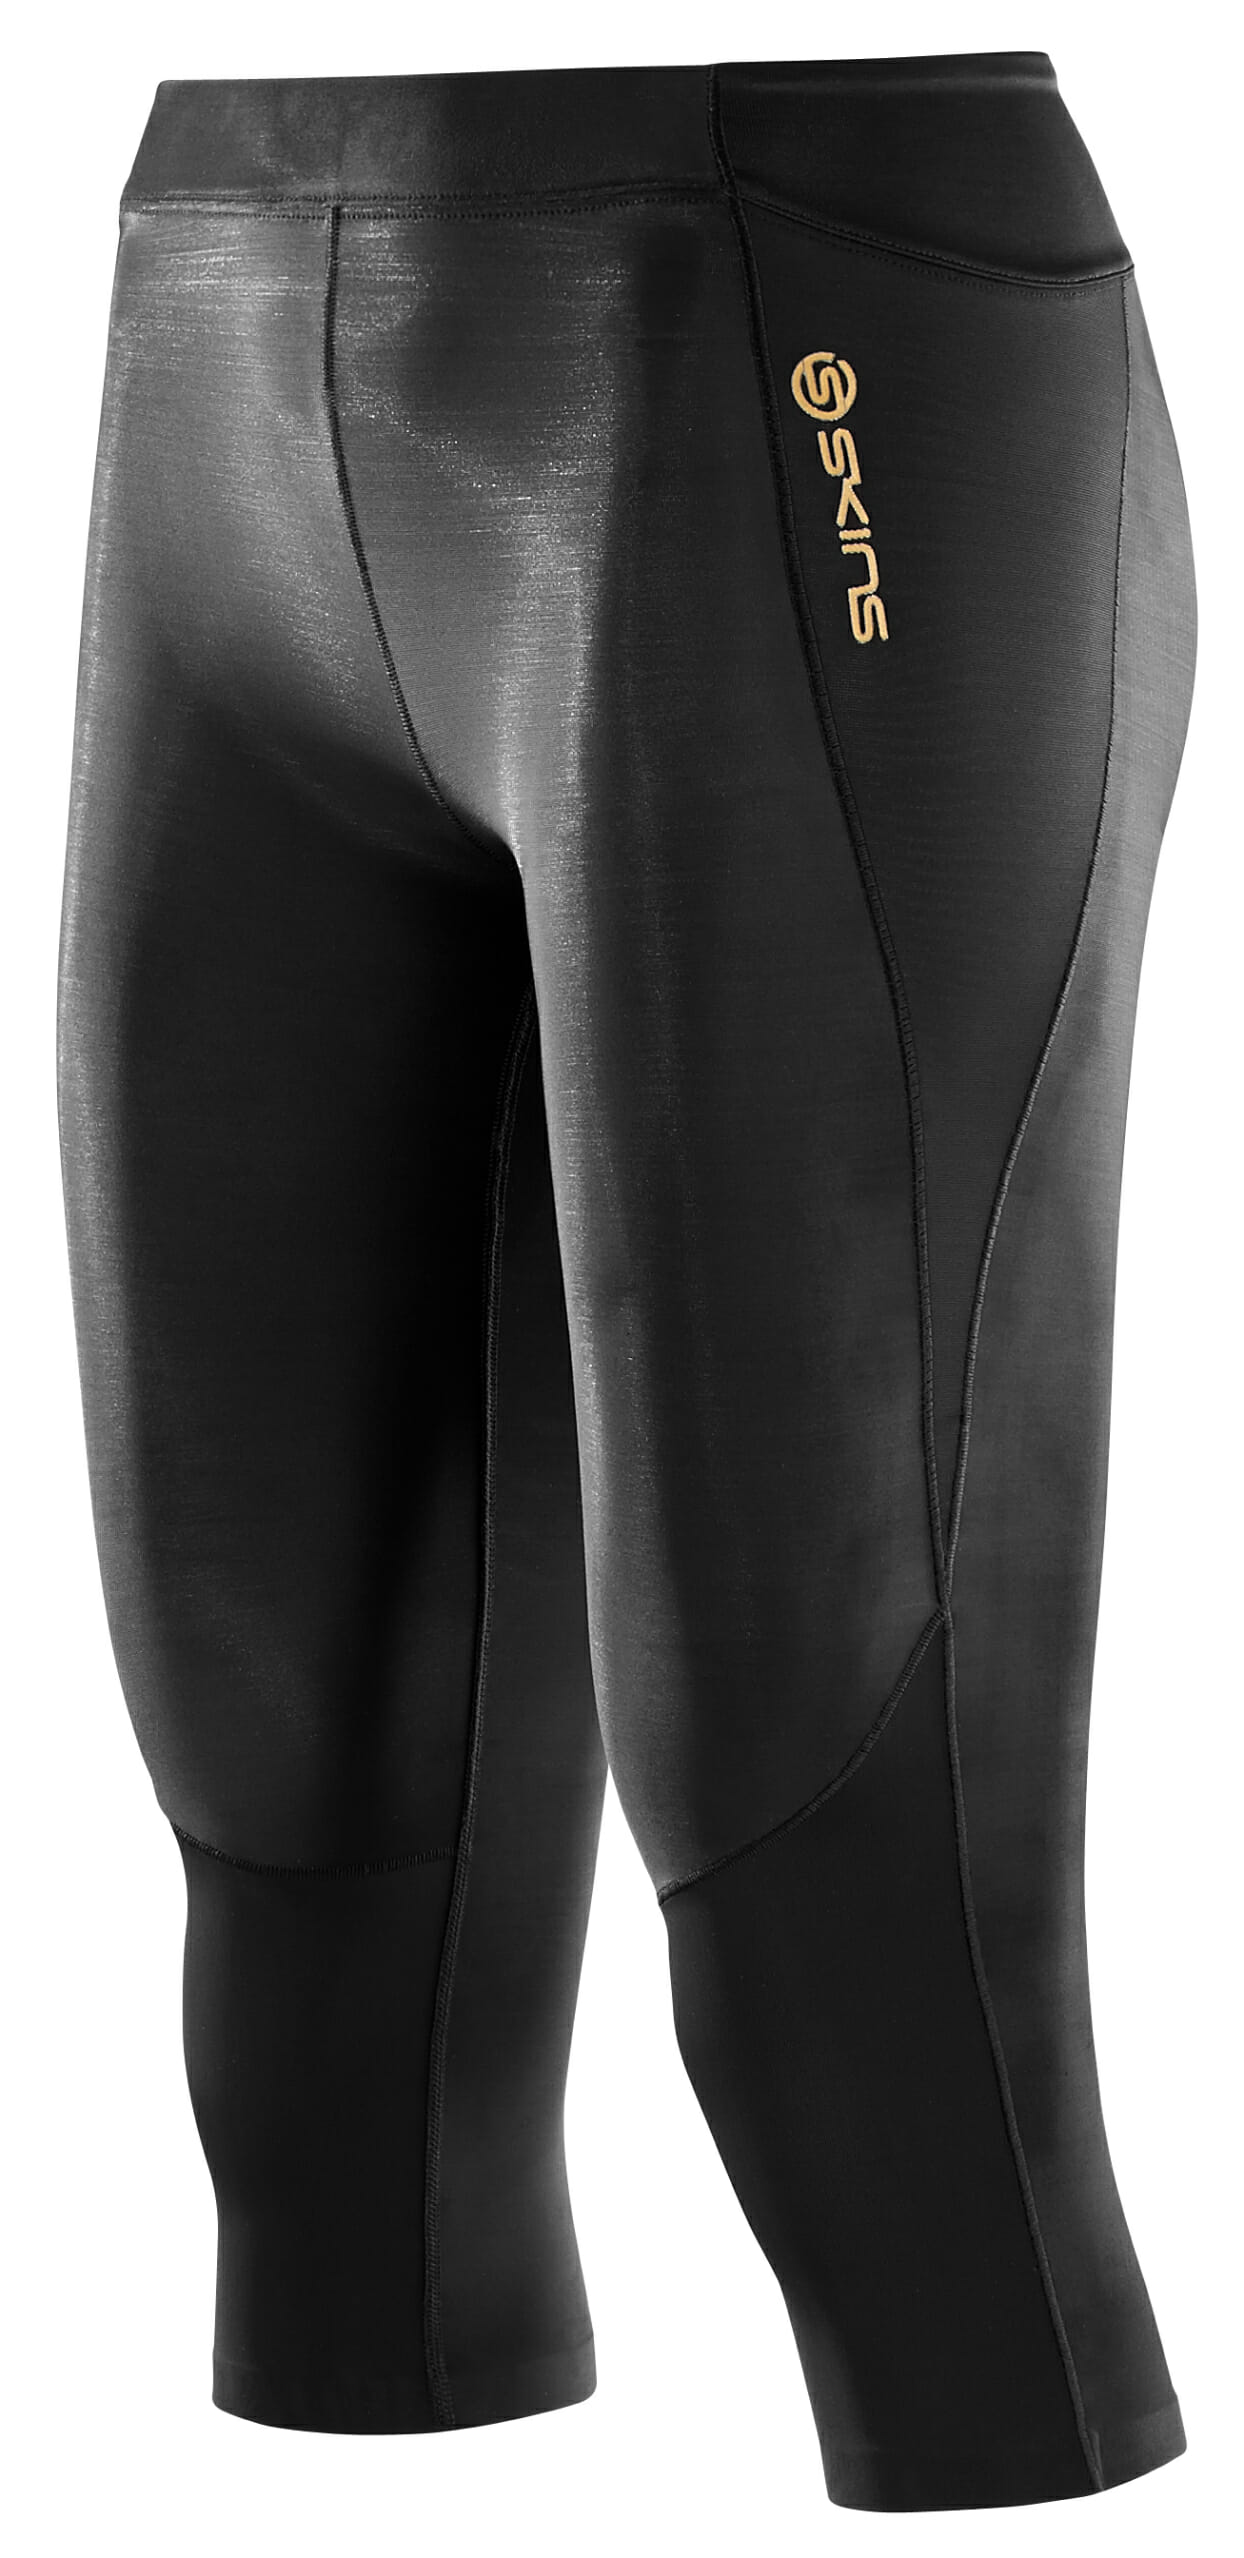 A400 Womens Long Tights Black - SKINS Compression UK